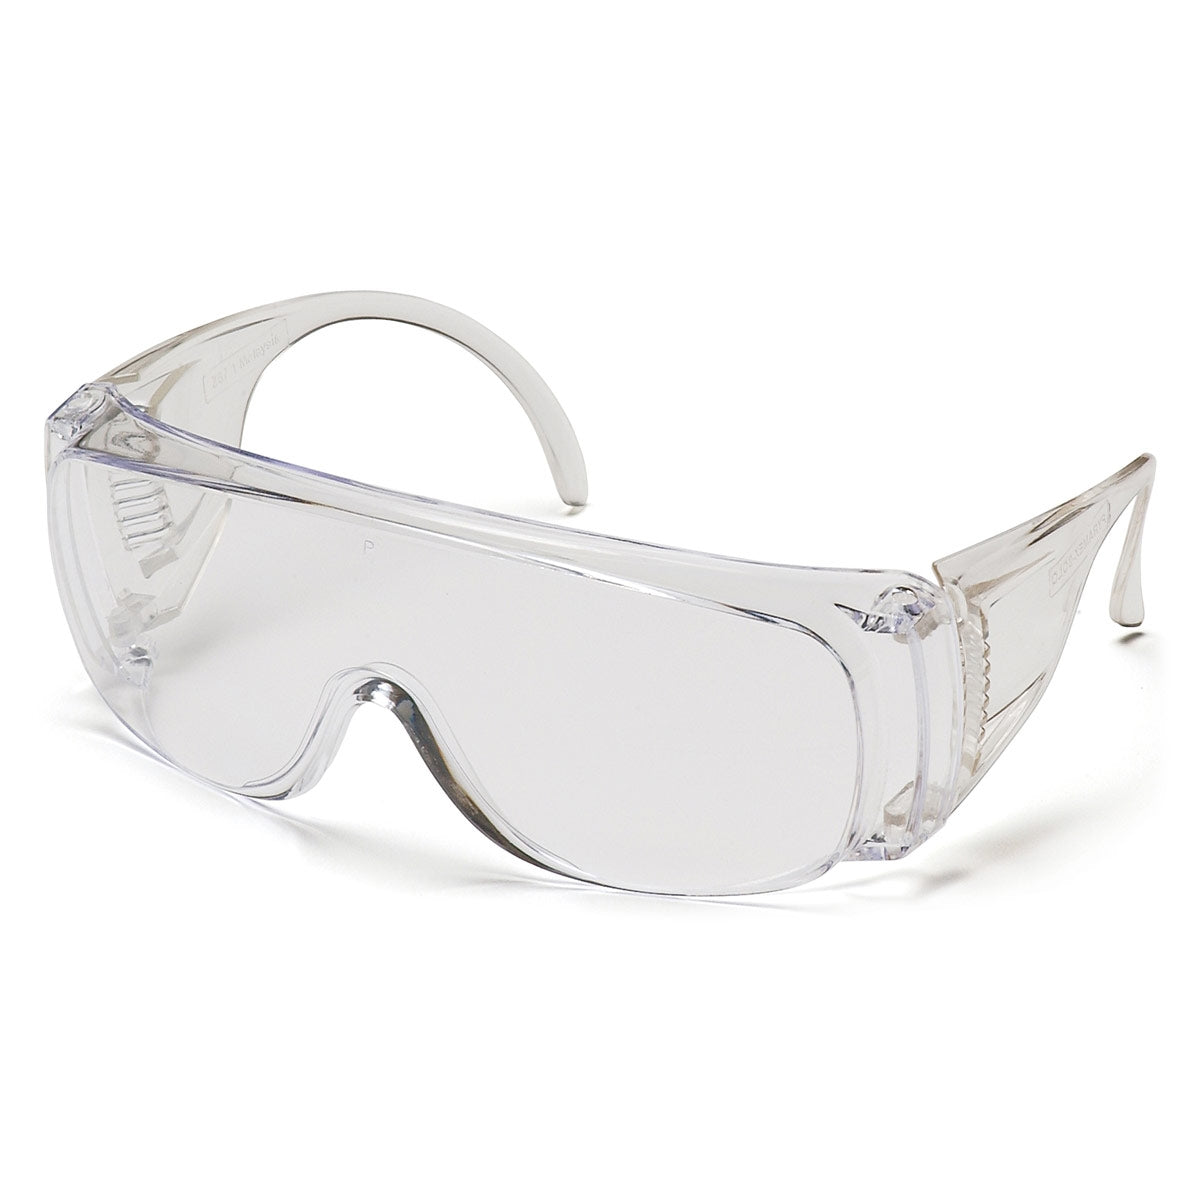 Pyramex Solo OTS Safety Glasses - Clear Lens - Clear Frame - 12 Pair